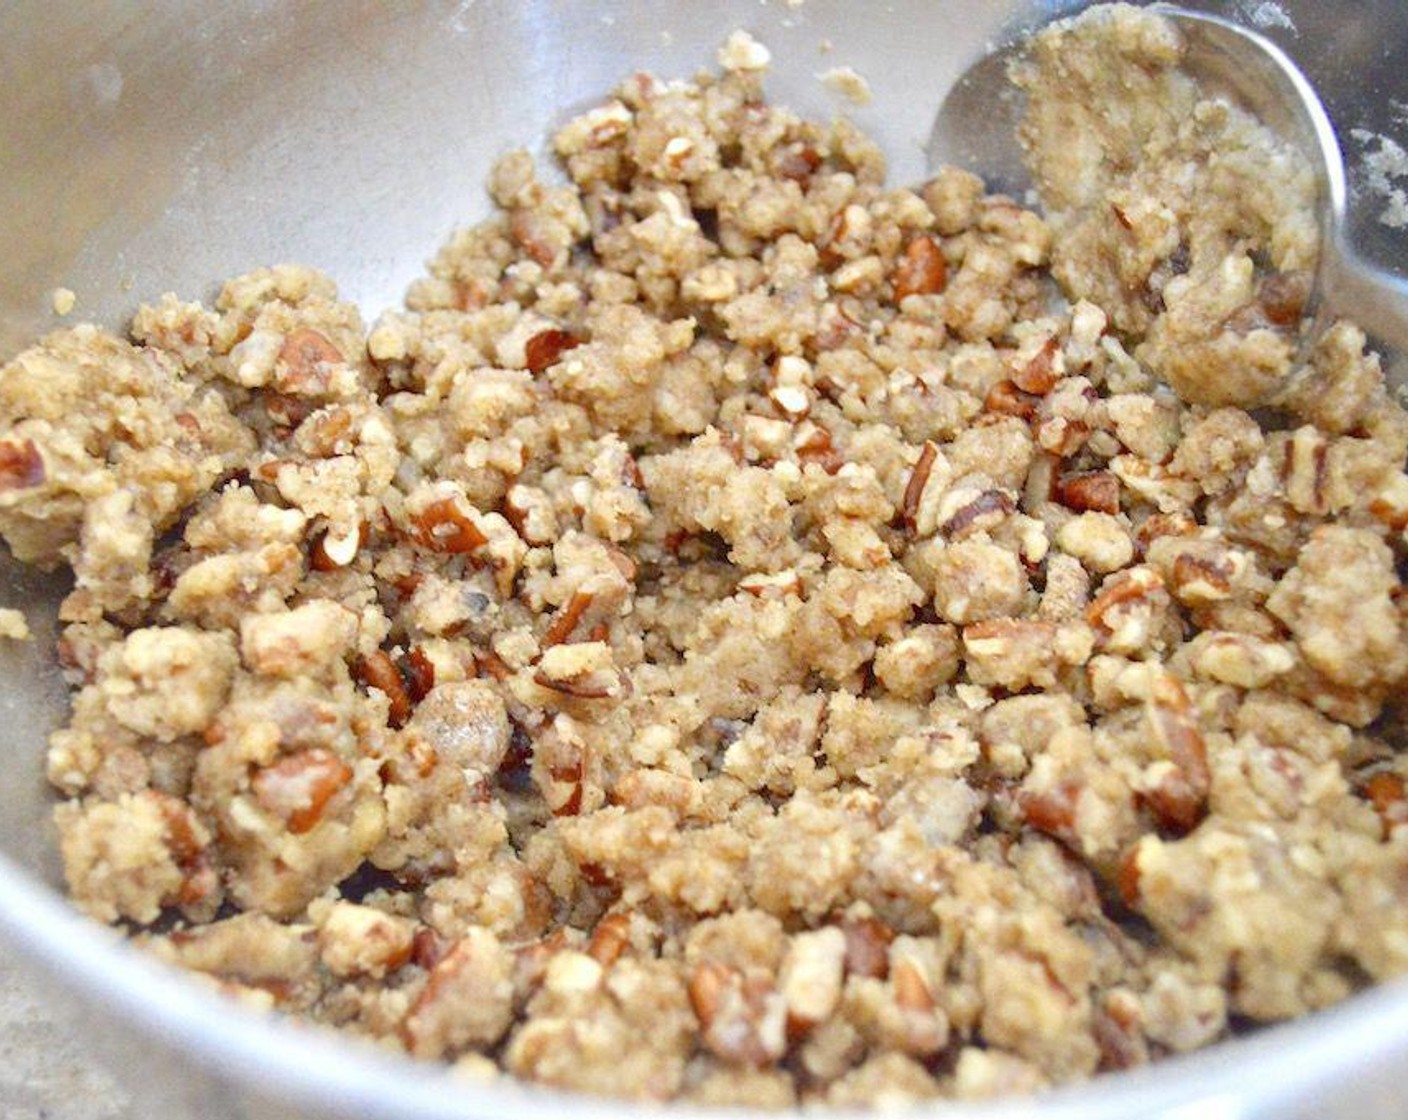 step 2 Make the crumb topping first. Simply stir the All-Purpose Flour (1/2 cup), Chopped Pecans (1/2 cup), Dark Brown Sugar (1/3 cup), Ground Cinnamon (1/2 tsp), Ground Mahlab (1/2 tsp), Ground Cardamom (1/2 tsp), Rose Water (1/2 tsp), and Butter (1/2 cup) together thoroughly until it is a moist, pebbly crumb texture.